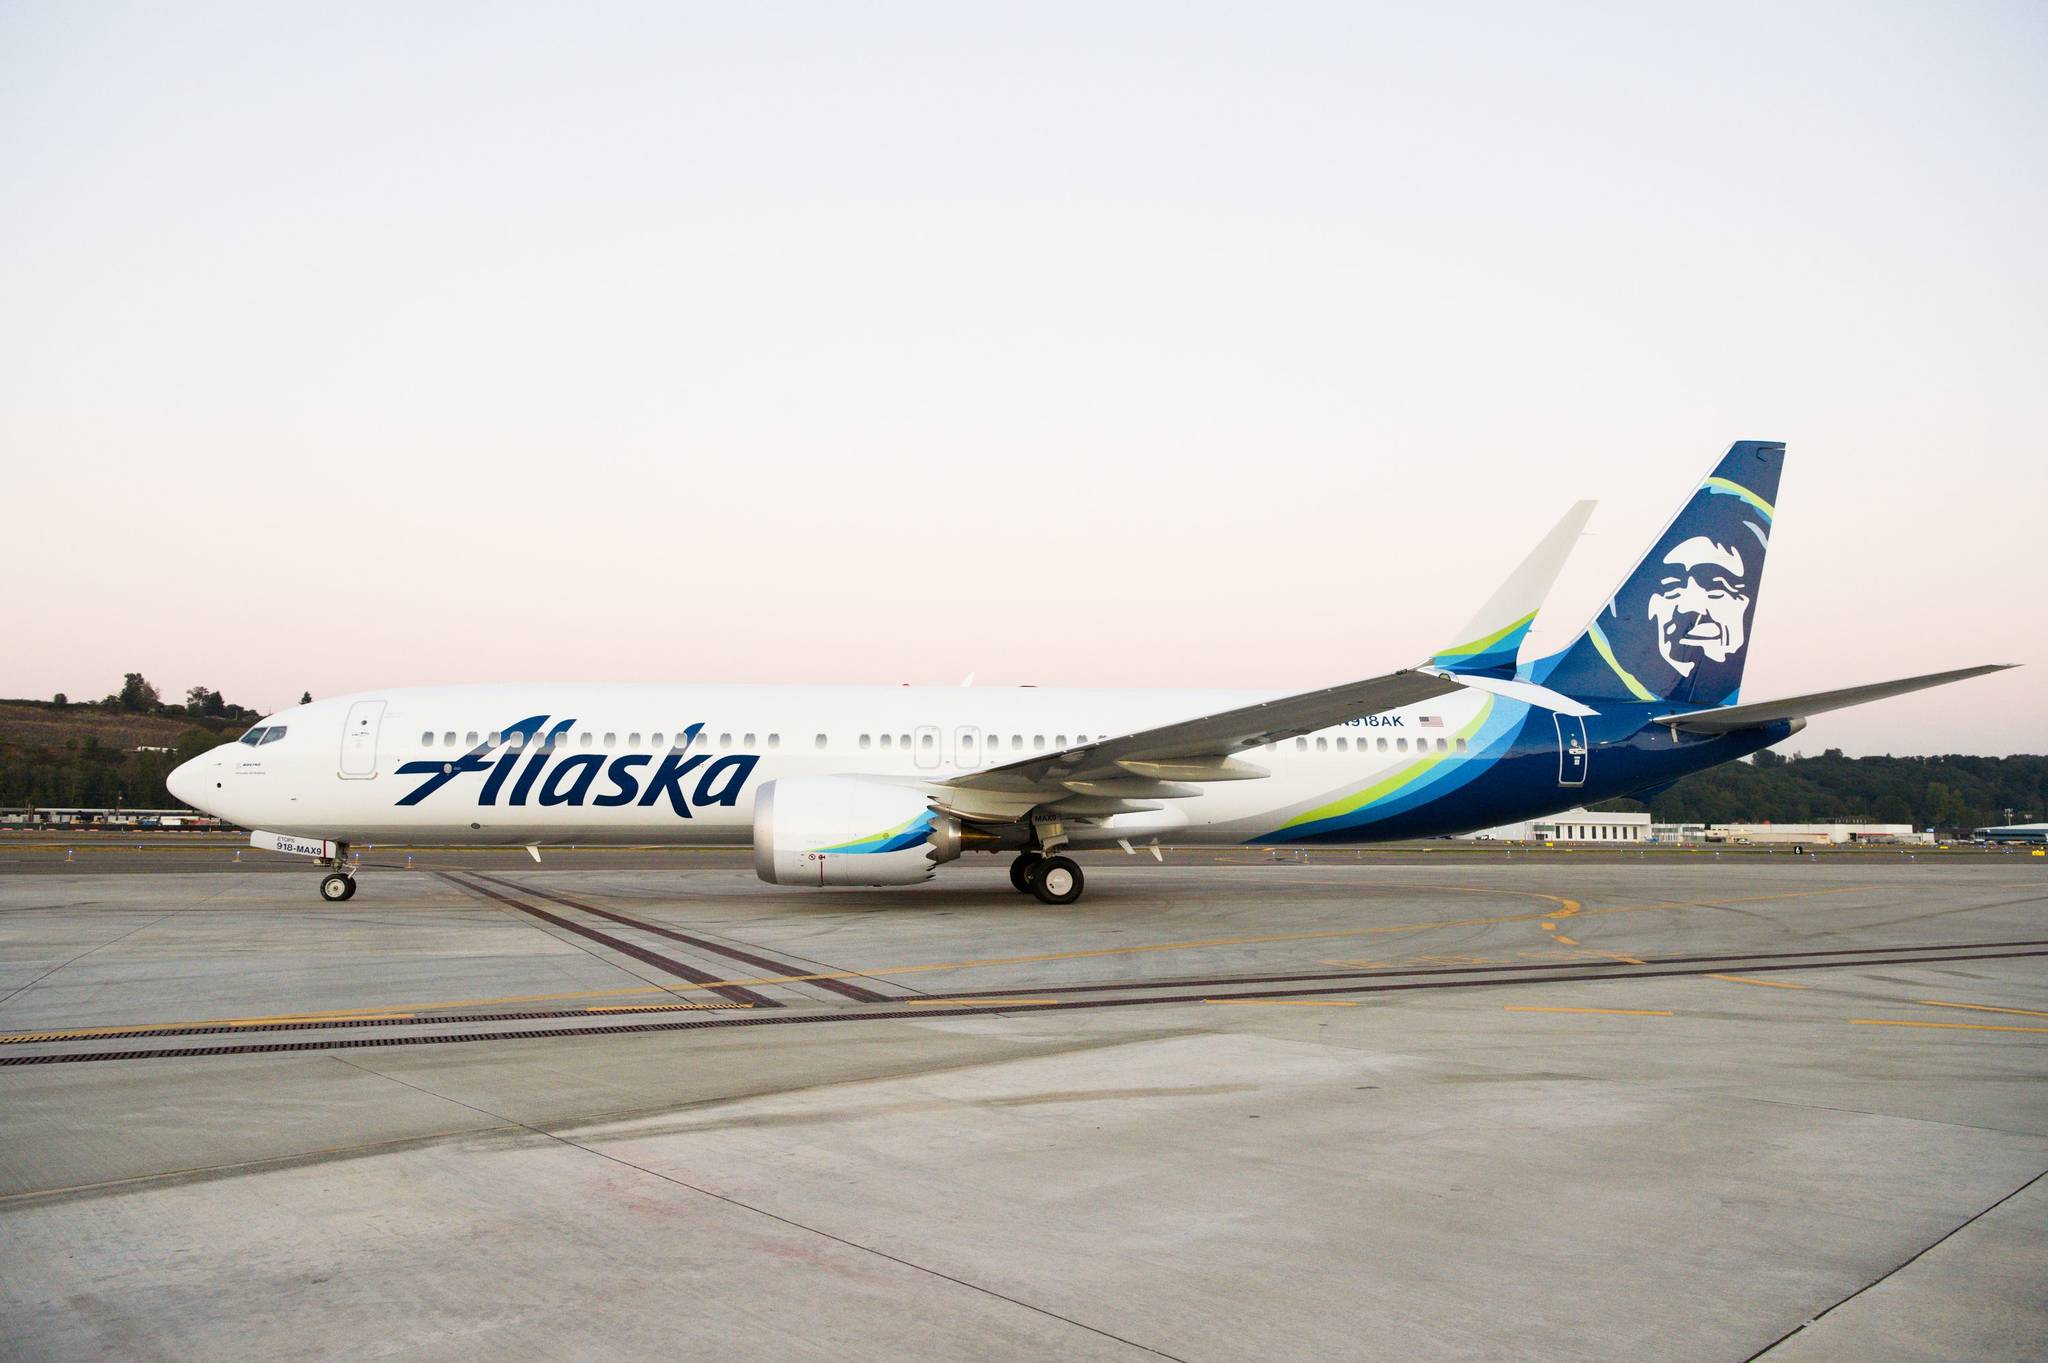 Alaska Airlines announced recently that it would expand its orders of the recently ungrounded 737 MAX aircraft, shown here, for delivery over the next several years. (Courtesy photo / Alaska Airlines)